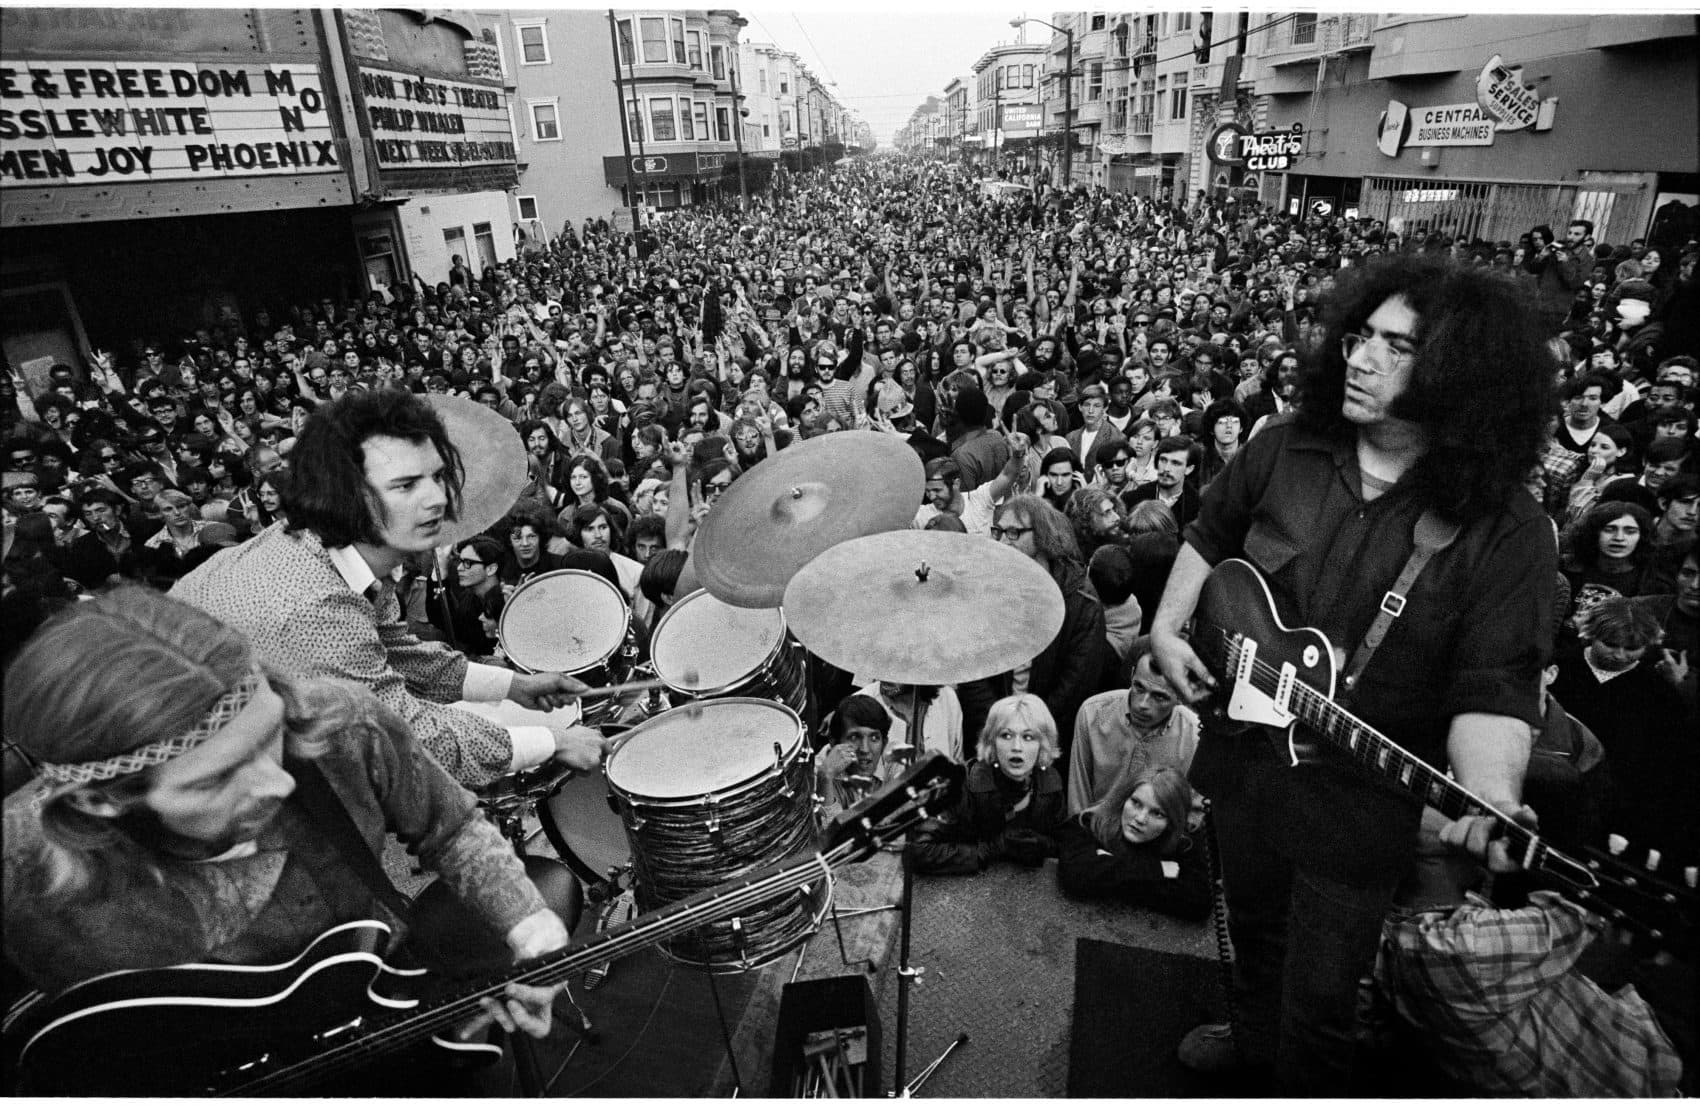 The Grateful Dead performing on Haight Street March 3, 1968. Left to right: Phil Lesh, Bill Kreutzmann and Jerry Garcia. (Courtesy Jim Marshall Photography LLC)